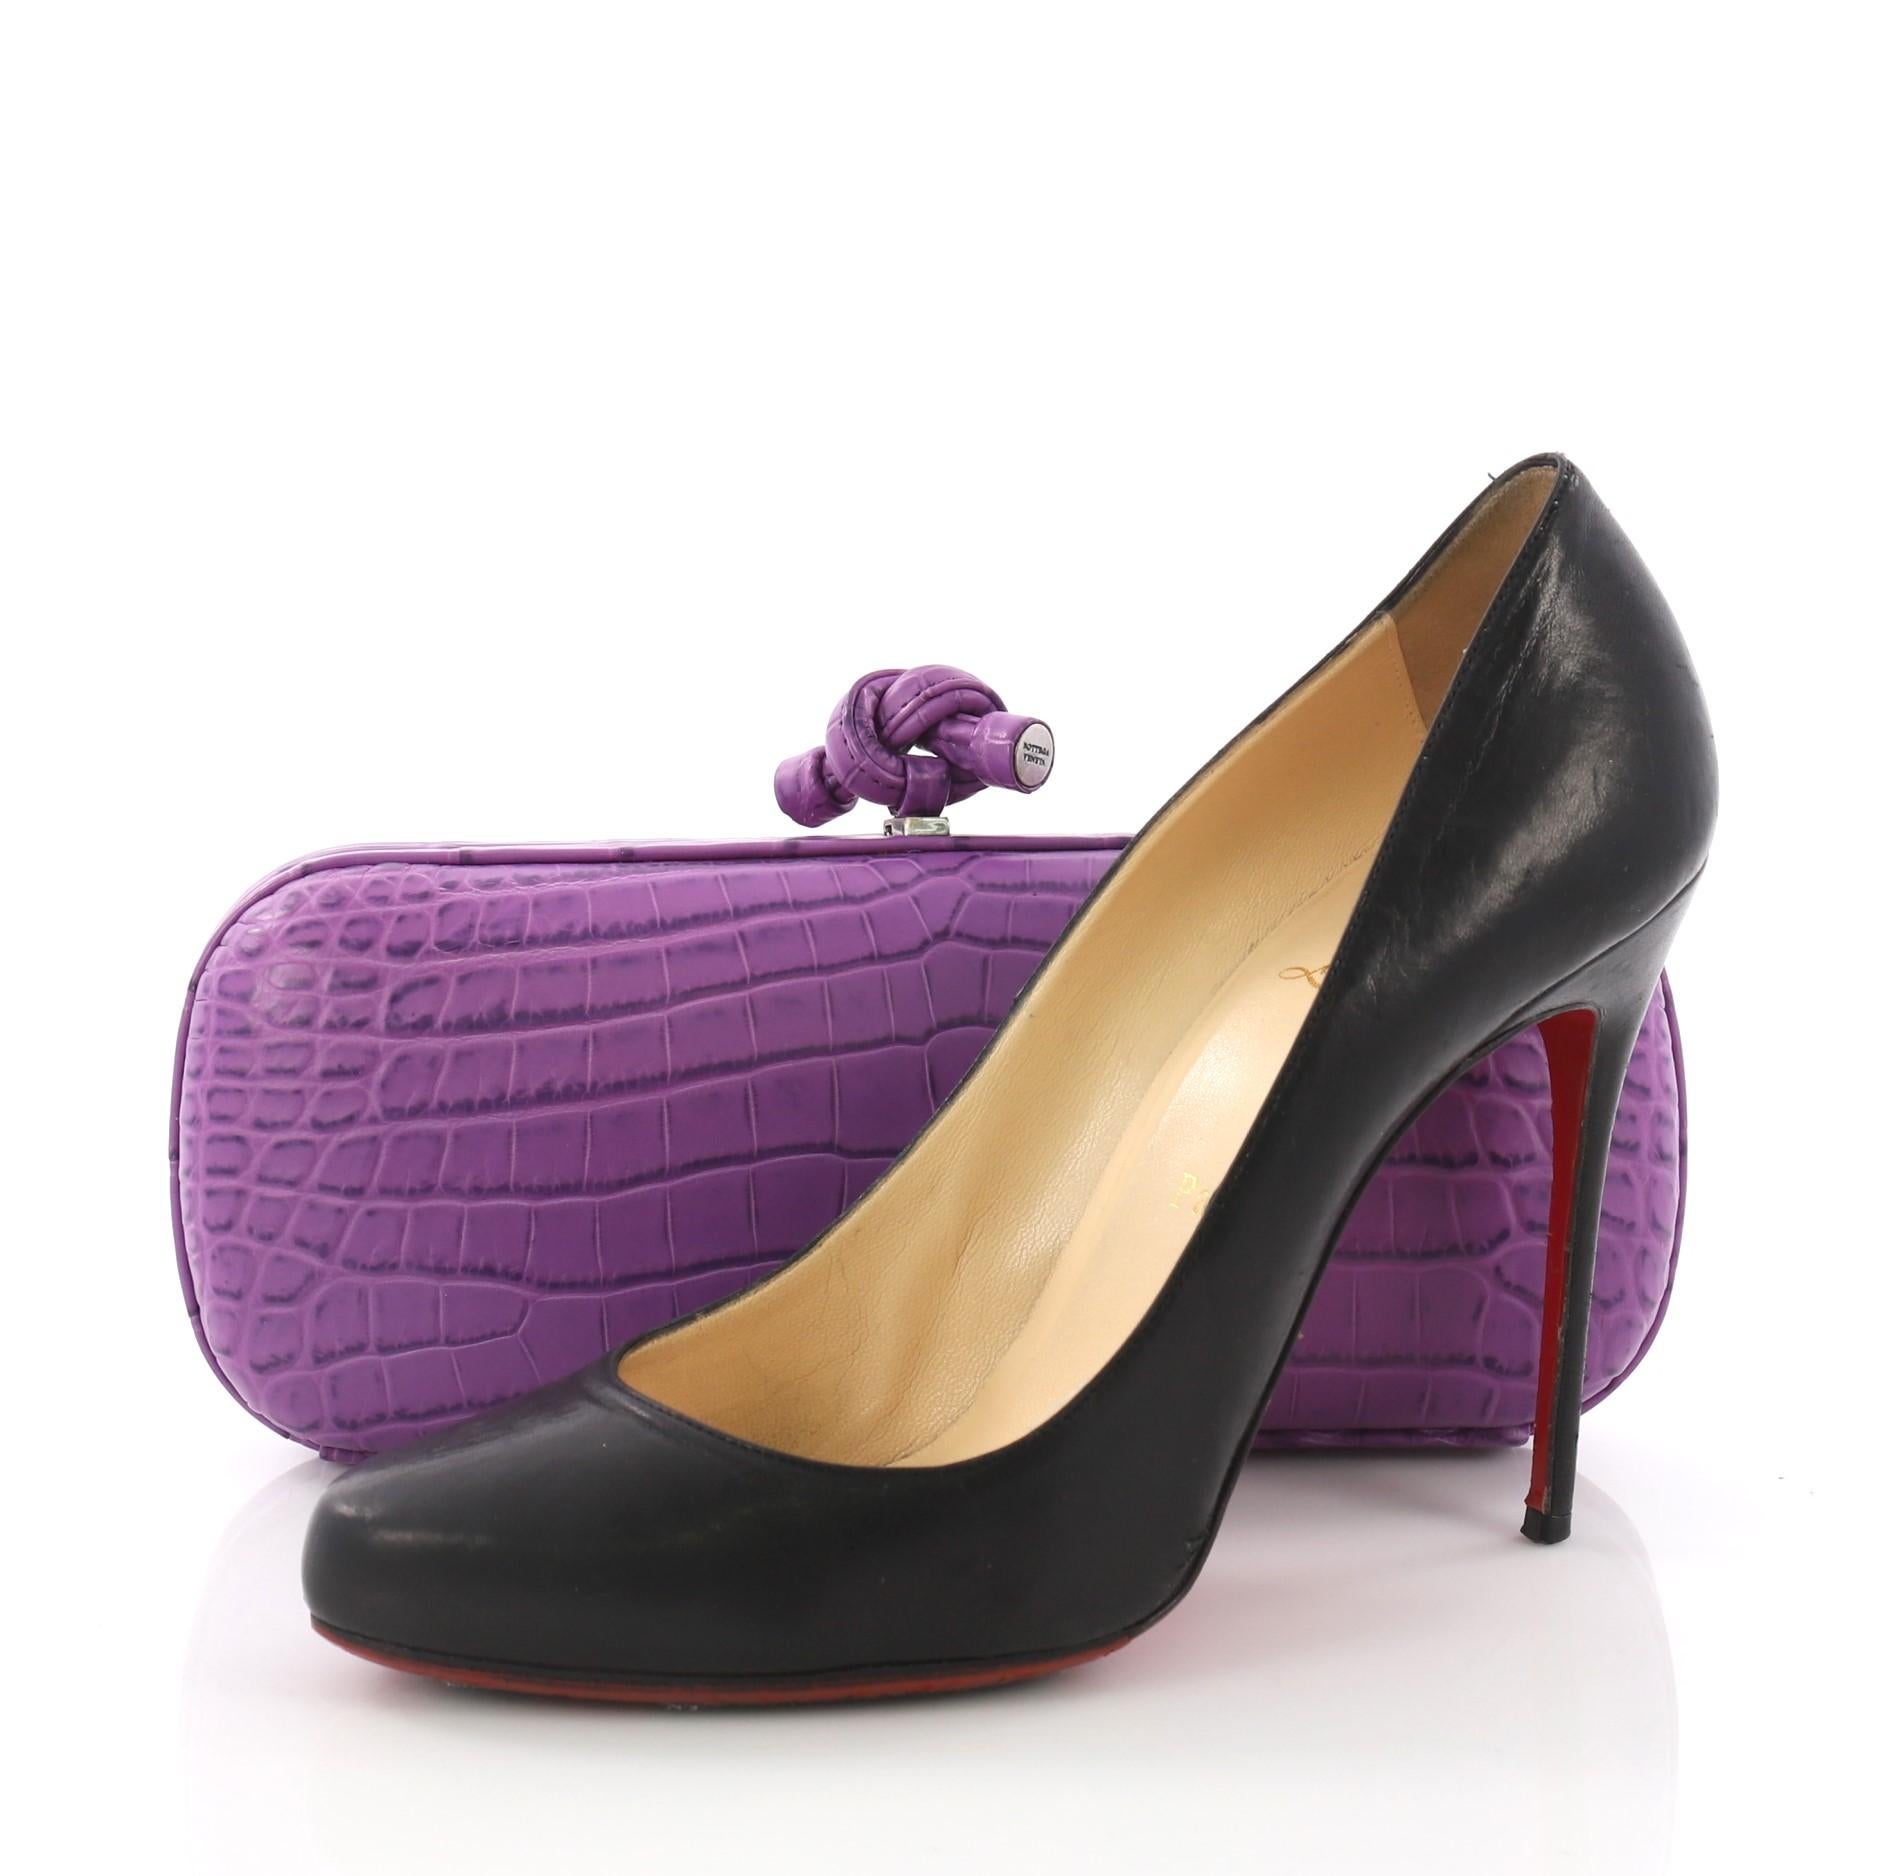 This Bottega Veneta Box Knot Clutch Crocodile Long, crafted from genuine purple crocodile skin, features silver-tone hardware . Its top knot clasp closure opens to a gray microfiber interior. **Note: Shoe photographed is used as a sizing reference,